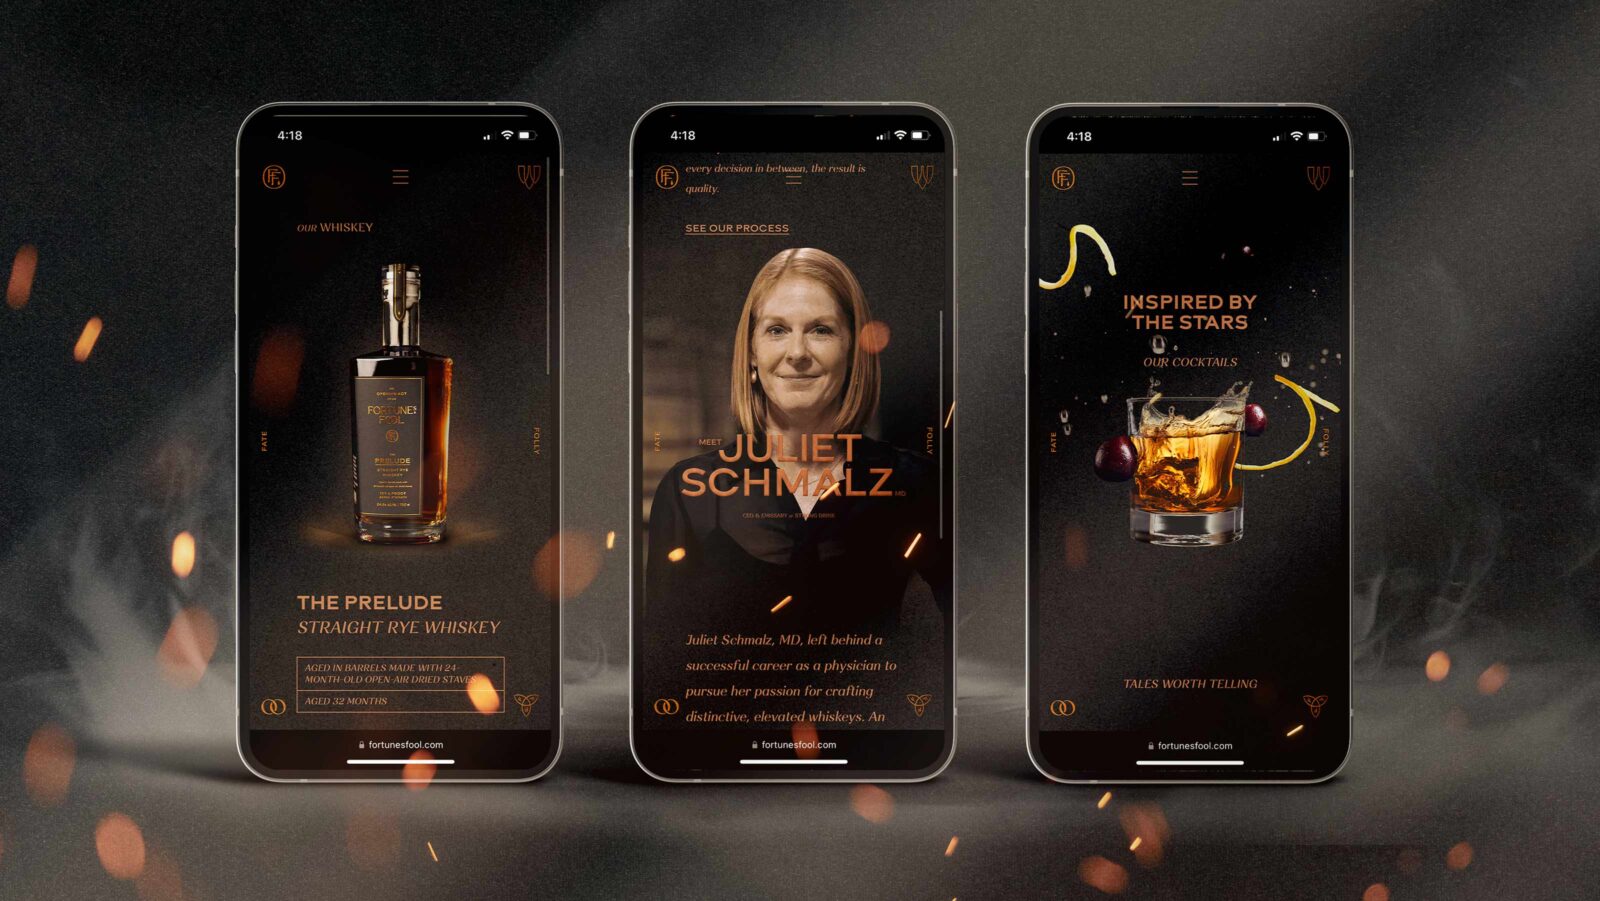 fortune's fool whiskey website displayed on mobile devices in a smoky, ambient atmosphere